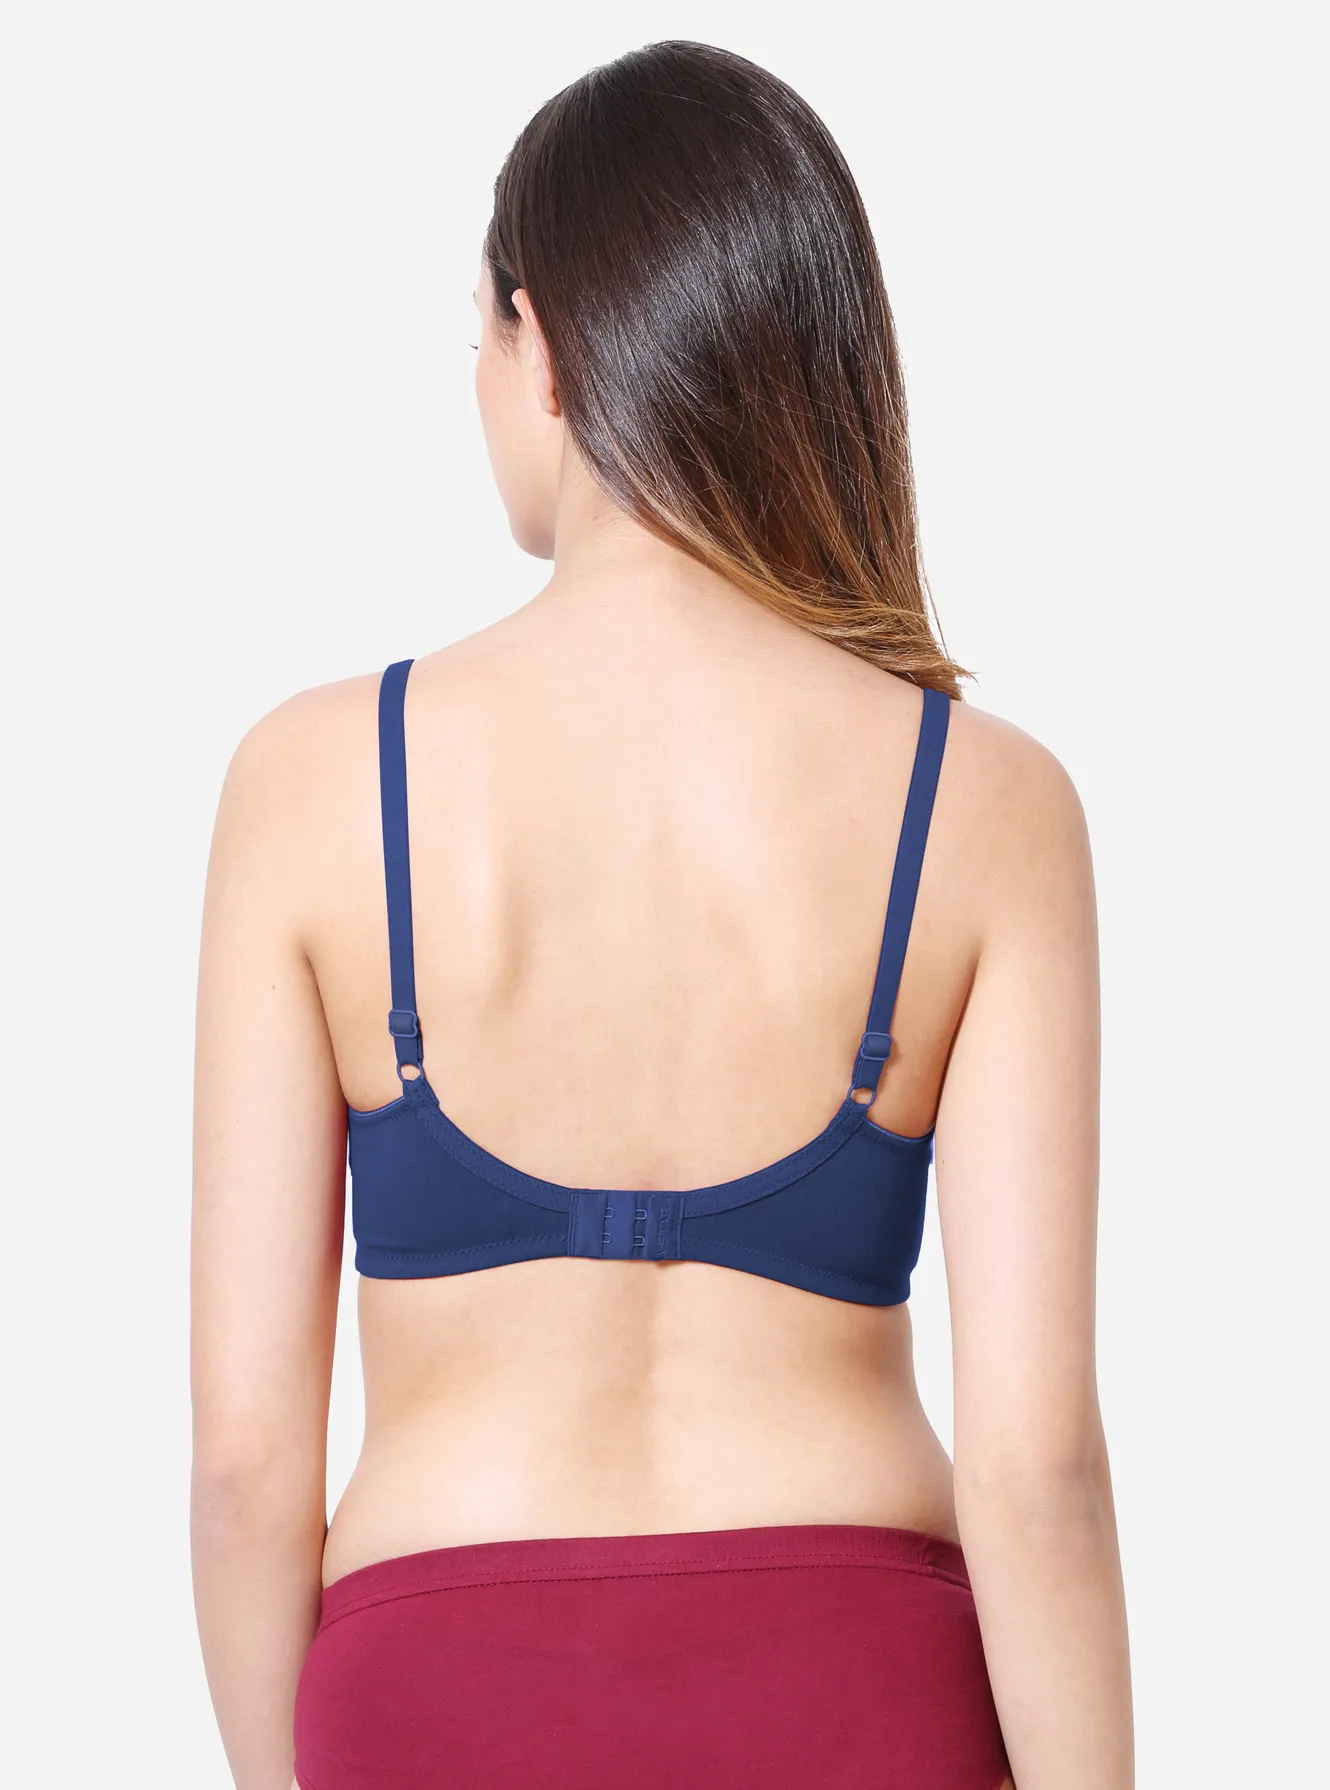 Full coverage daily wear bra with hidden side shaper panels